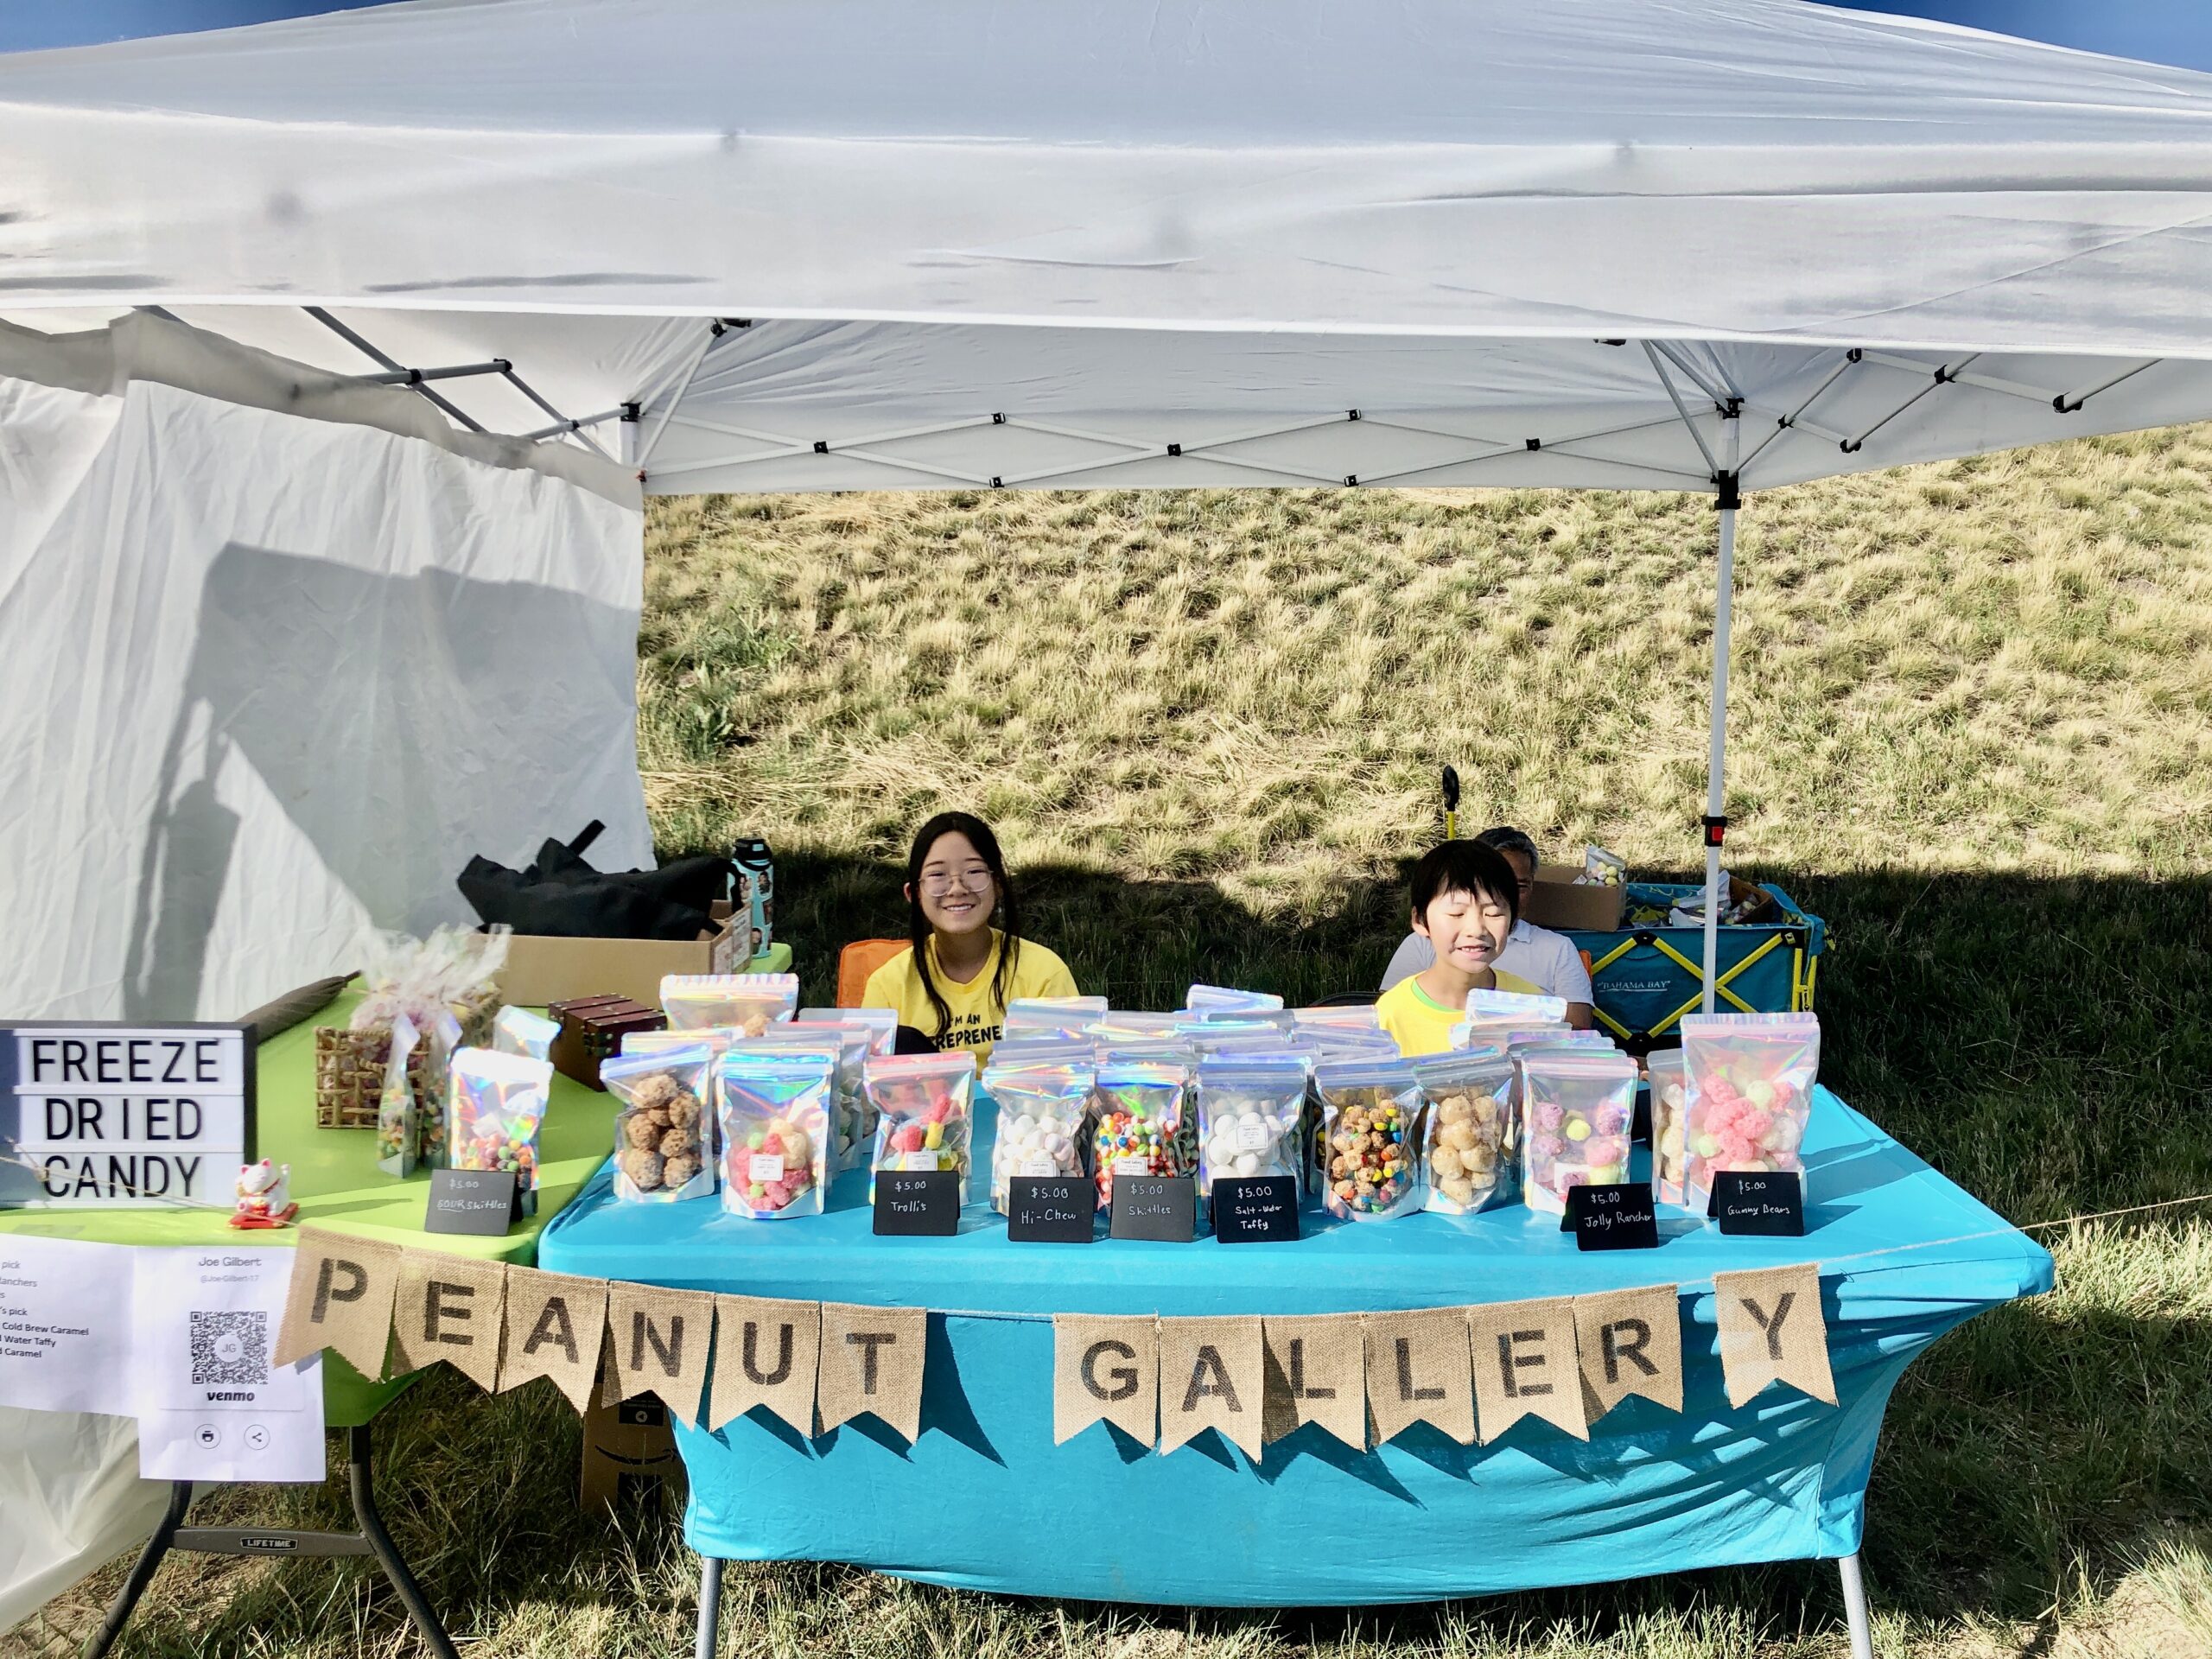 Meet Jasmine and Isaac, owners of The Peanut Gallery, who are bringing freeze dried candies and treats to Colorado!